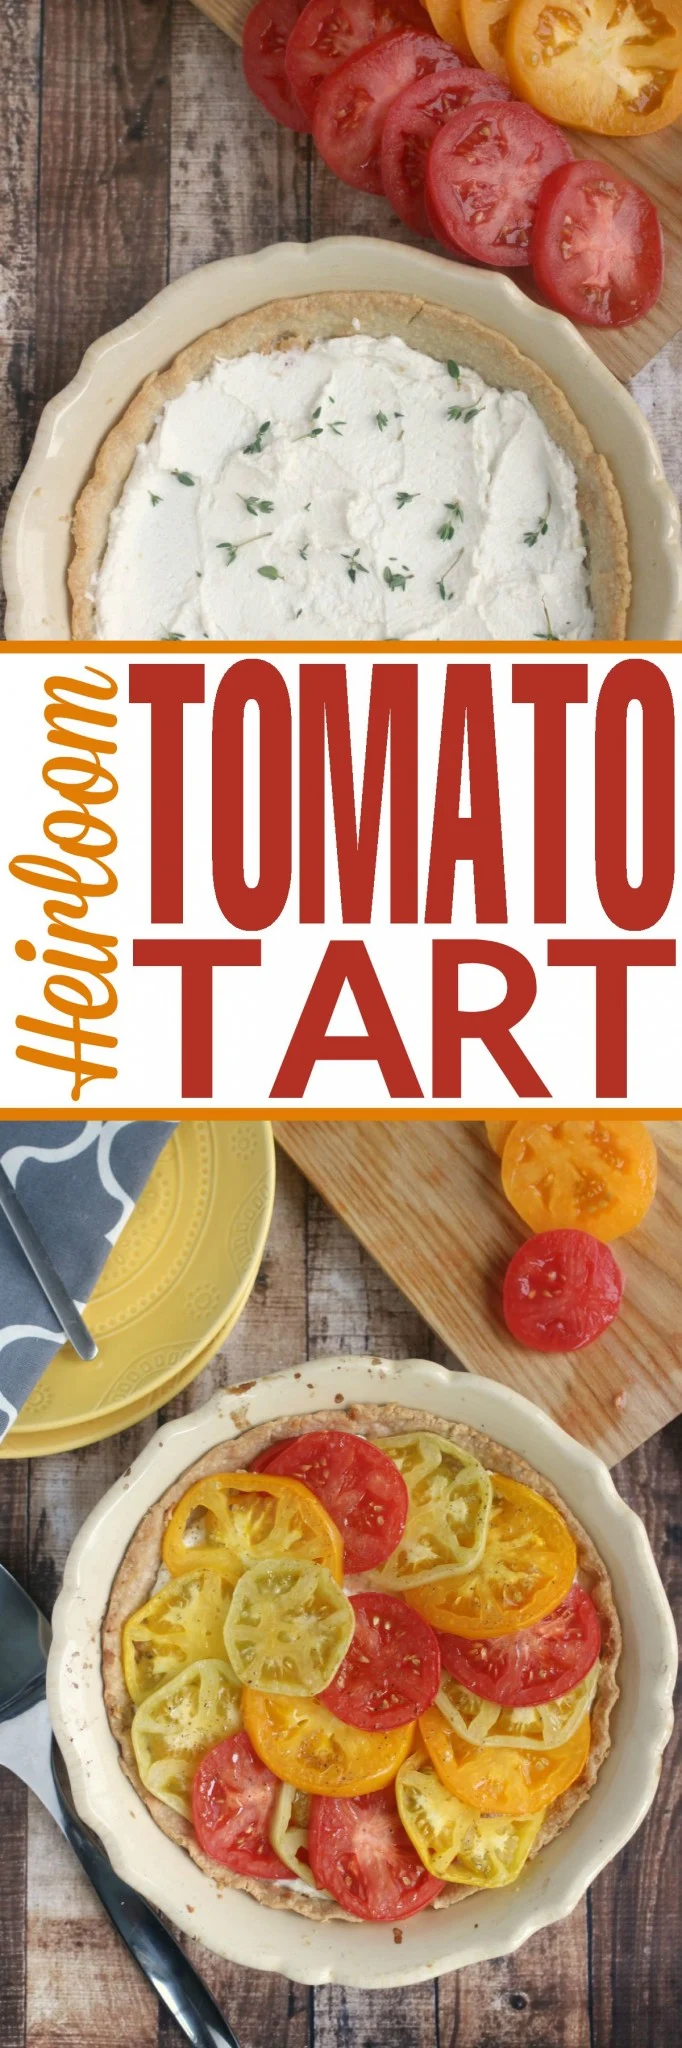 This Heirloom Tomato Tart really highlights the beauty and flavour of garden fresh heirloom tomatoes.  This is a summer recipe that is sure to be a hit!